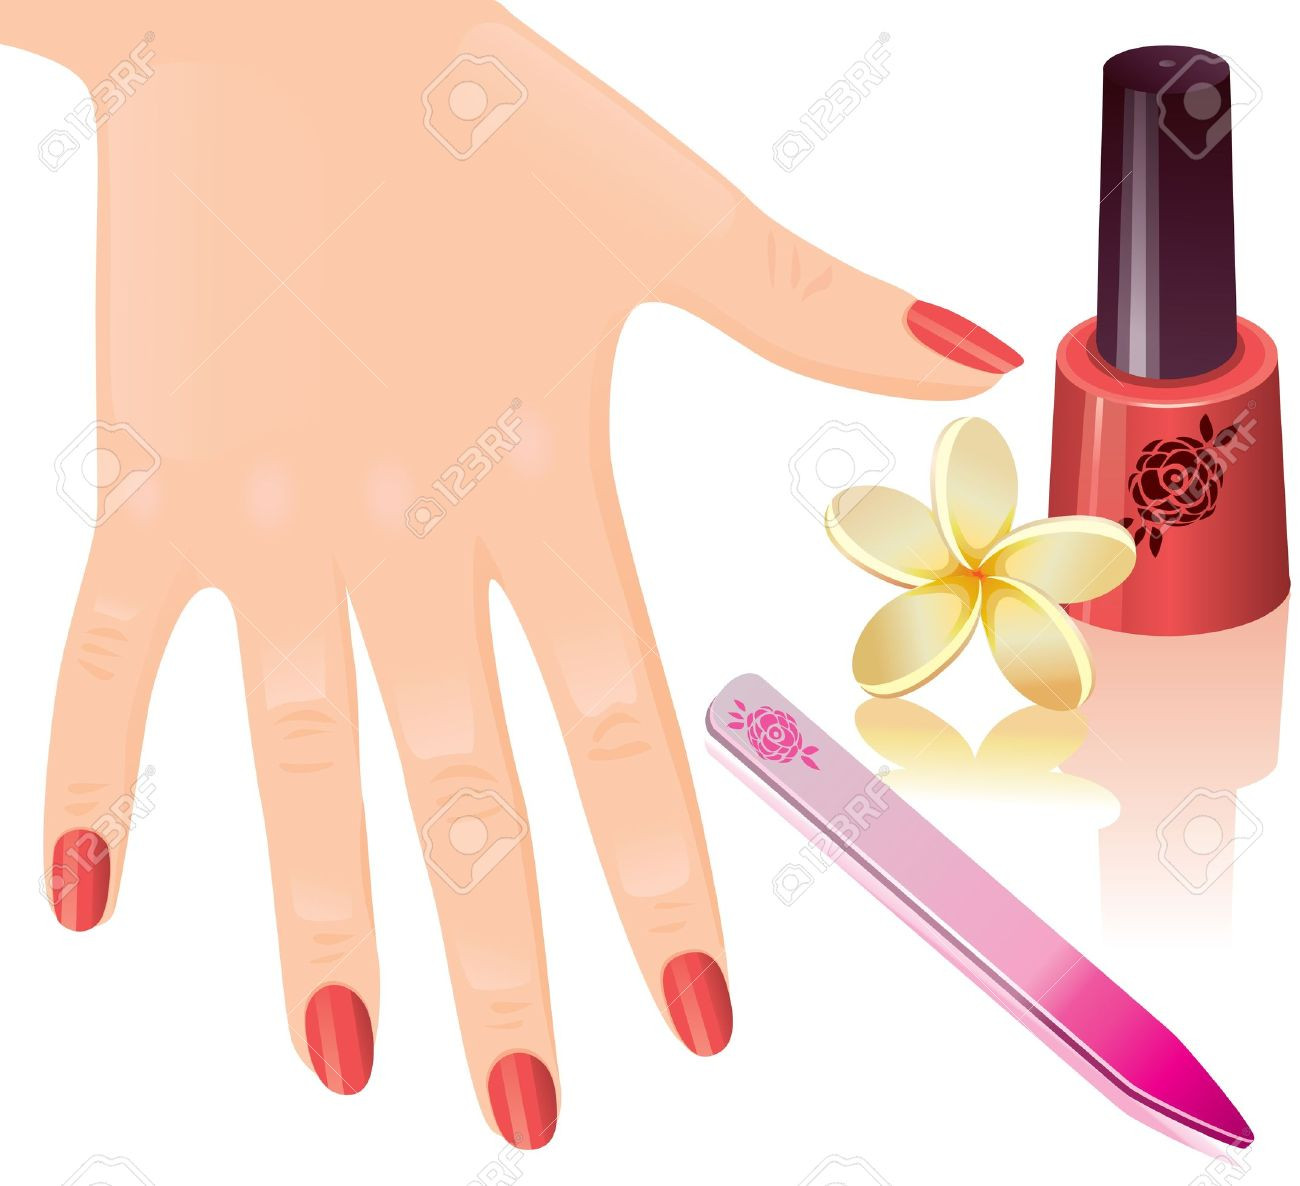 Maniküre Clipart
 Nails clipart manicure Pencil and in color nails clipart